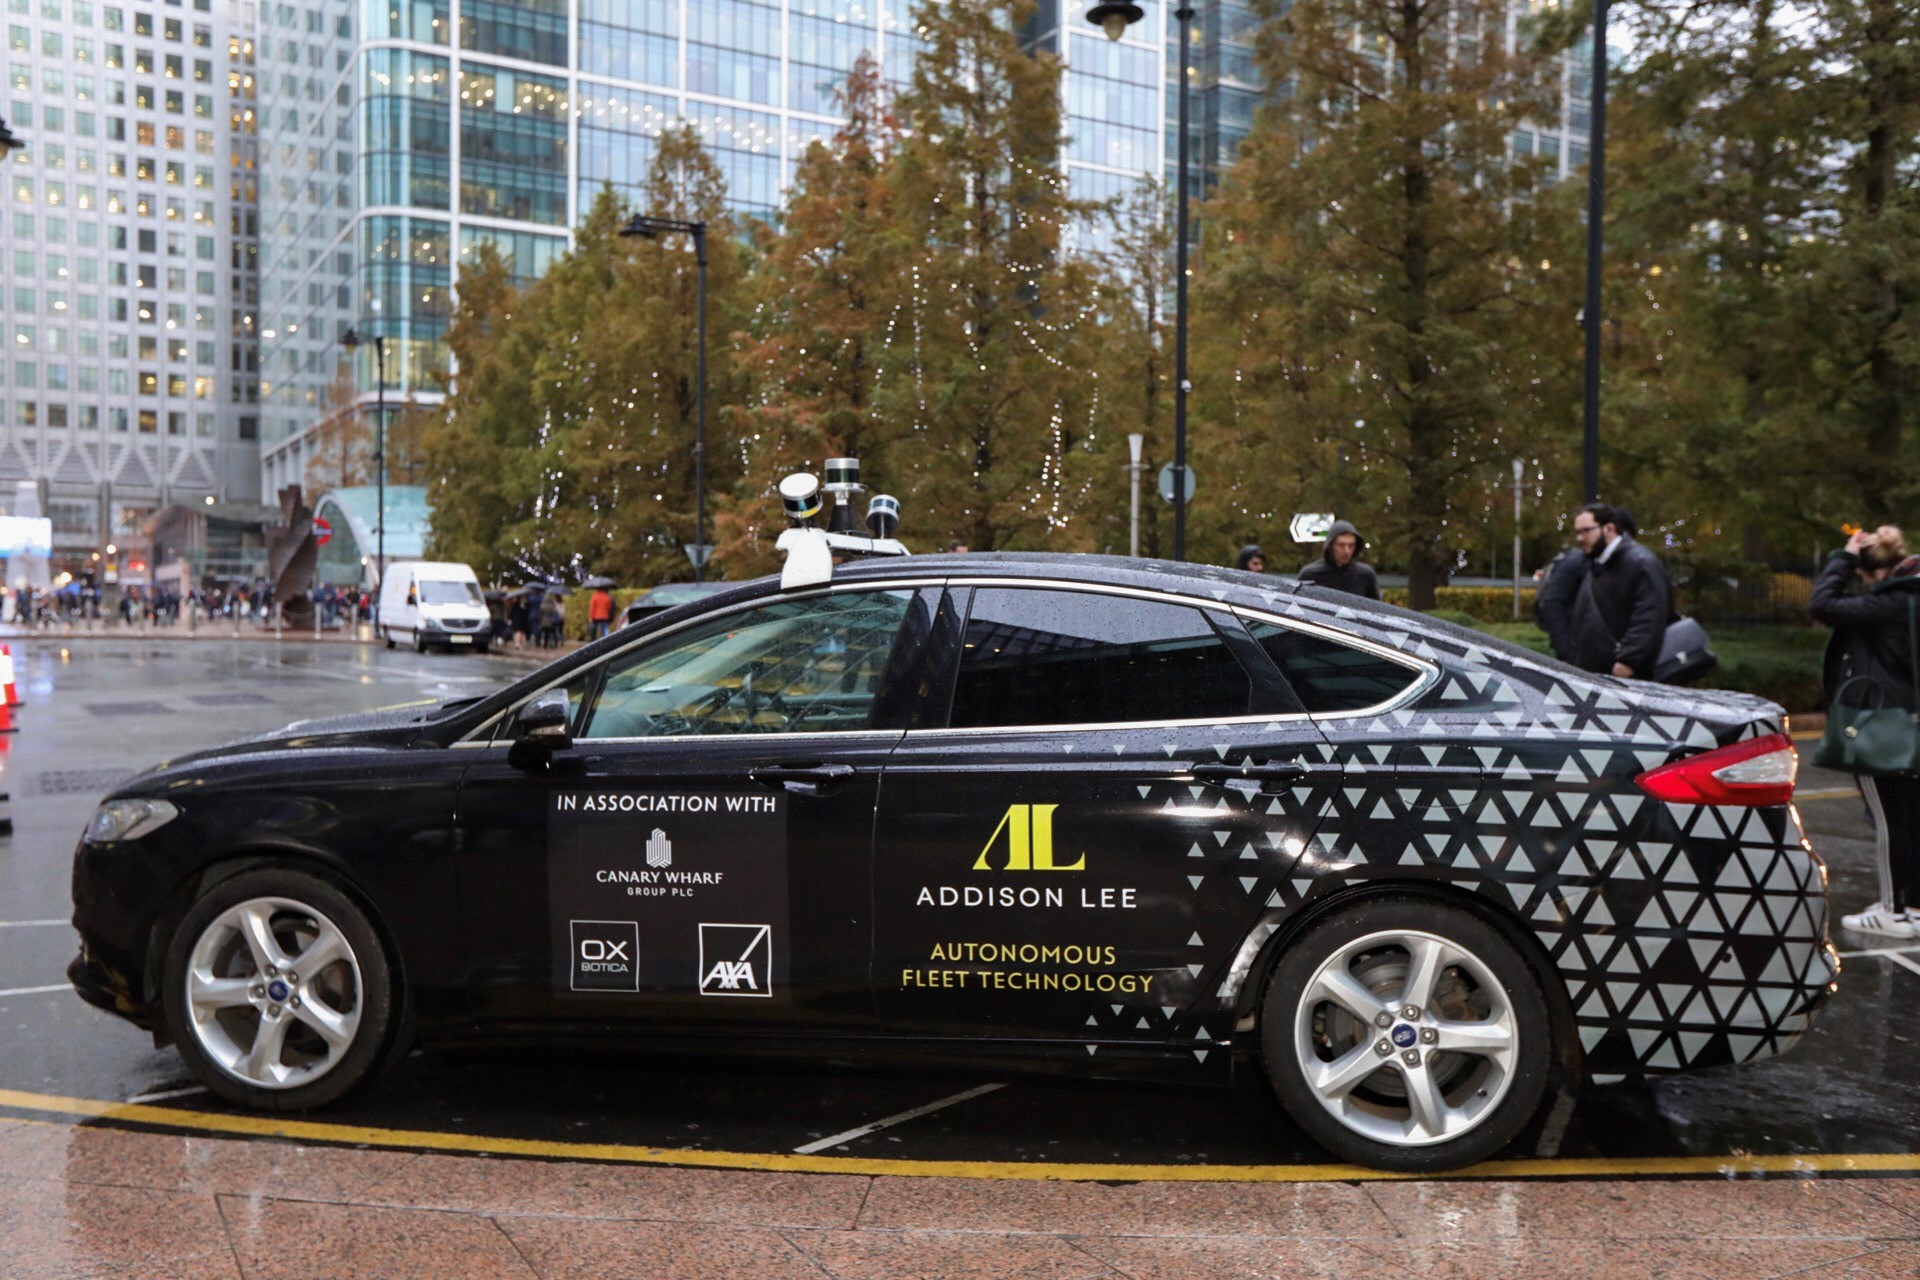 Addison Lee launches selfdriving taxi trials in Canary Wharf CityAM